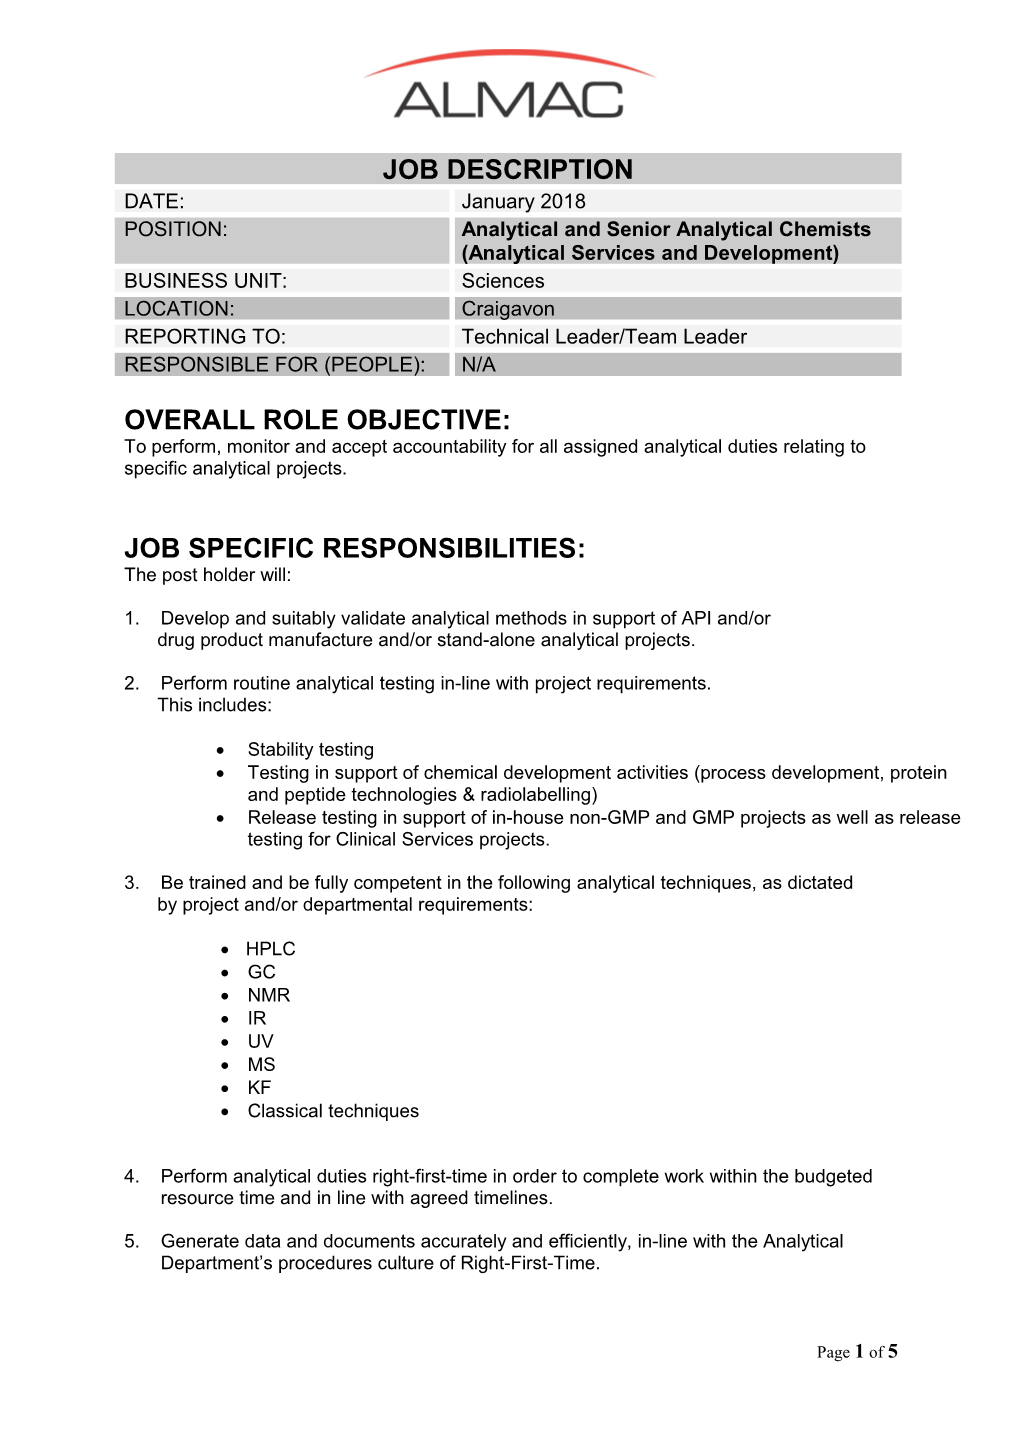 Overall Role Objective s3